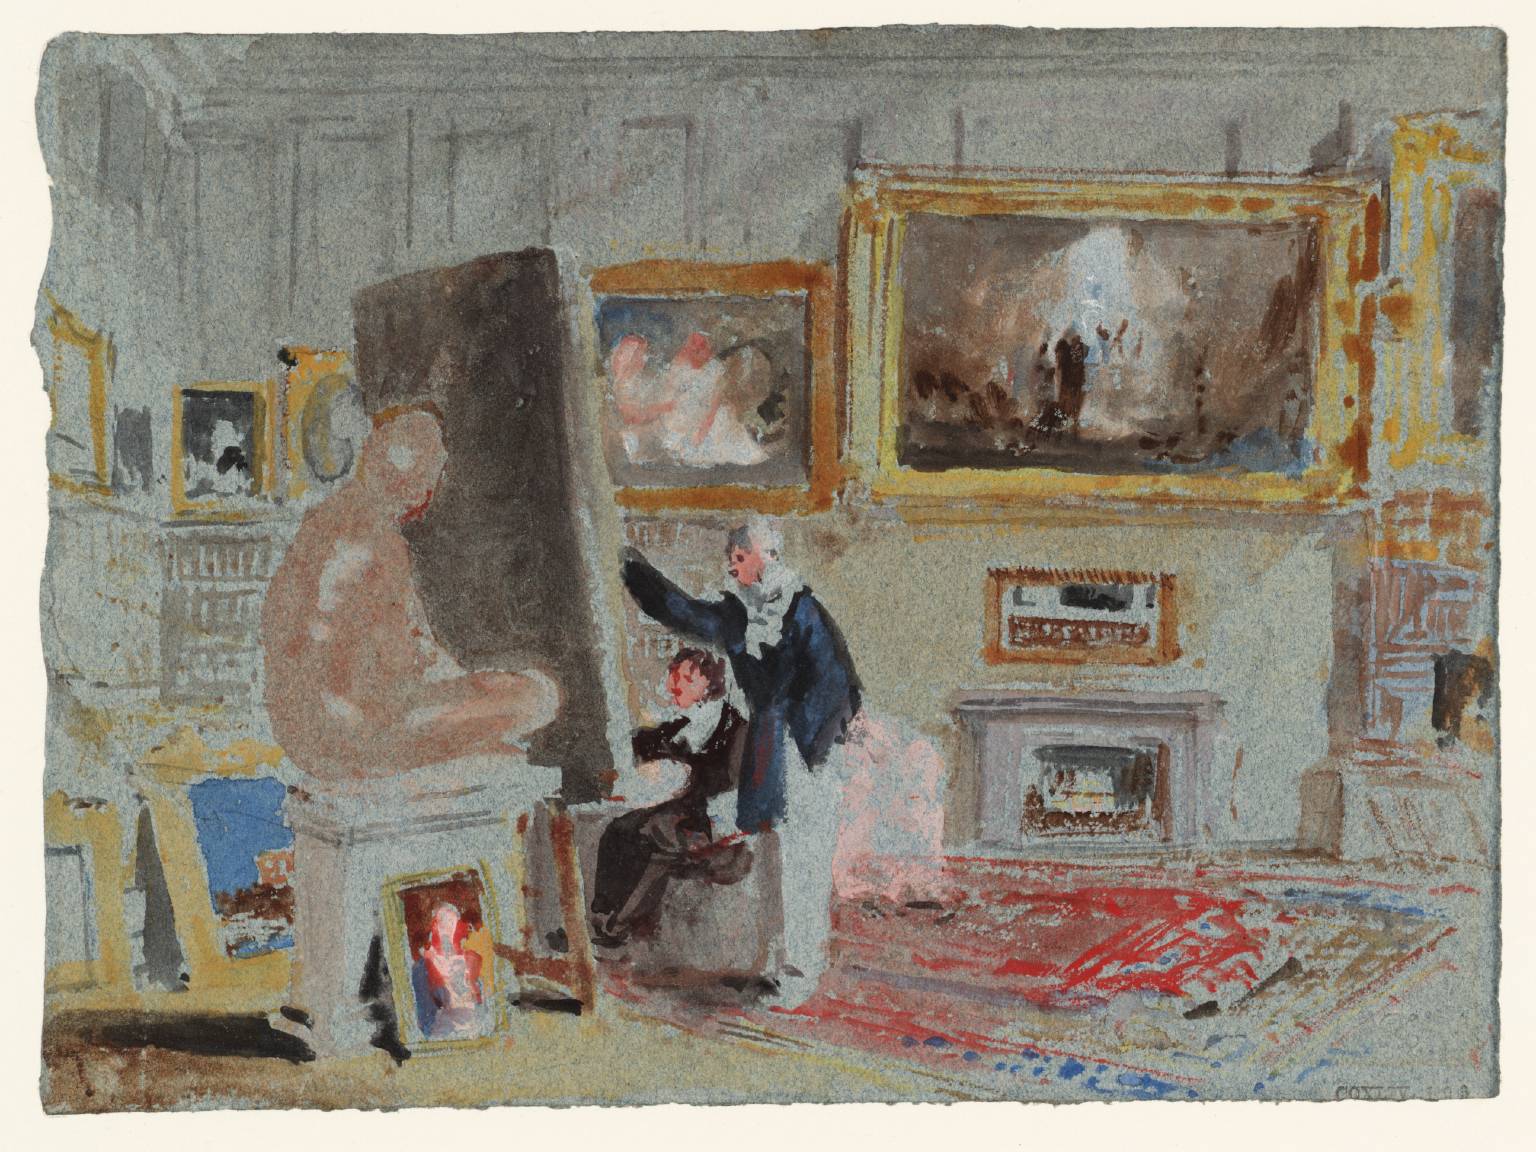 D22765: Two Artists in the Old Library: Washington Allston’s Picture, ‘Jacob’s Dream’, Hanging over the Fireplace (‘The Artist and the Amateur’)